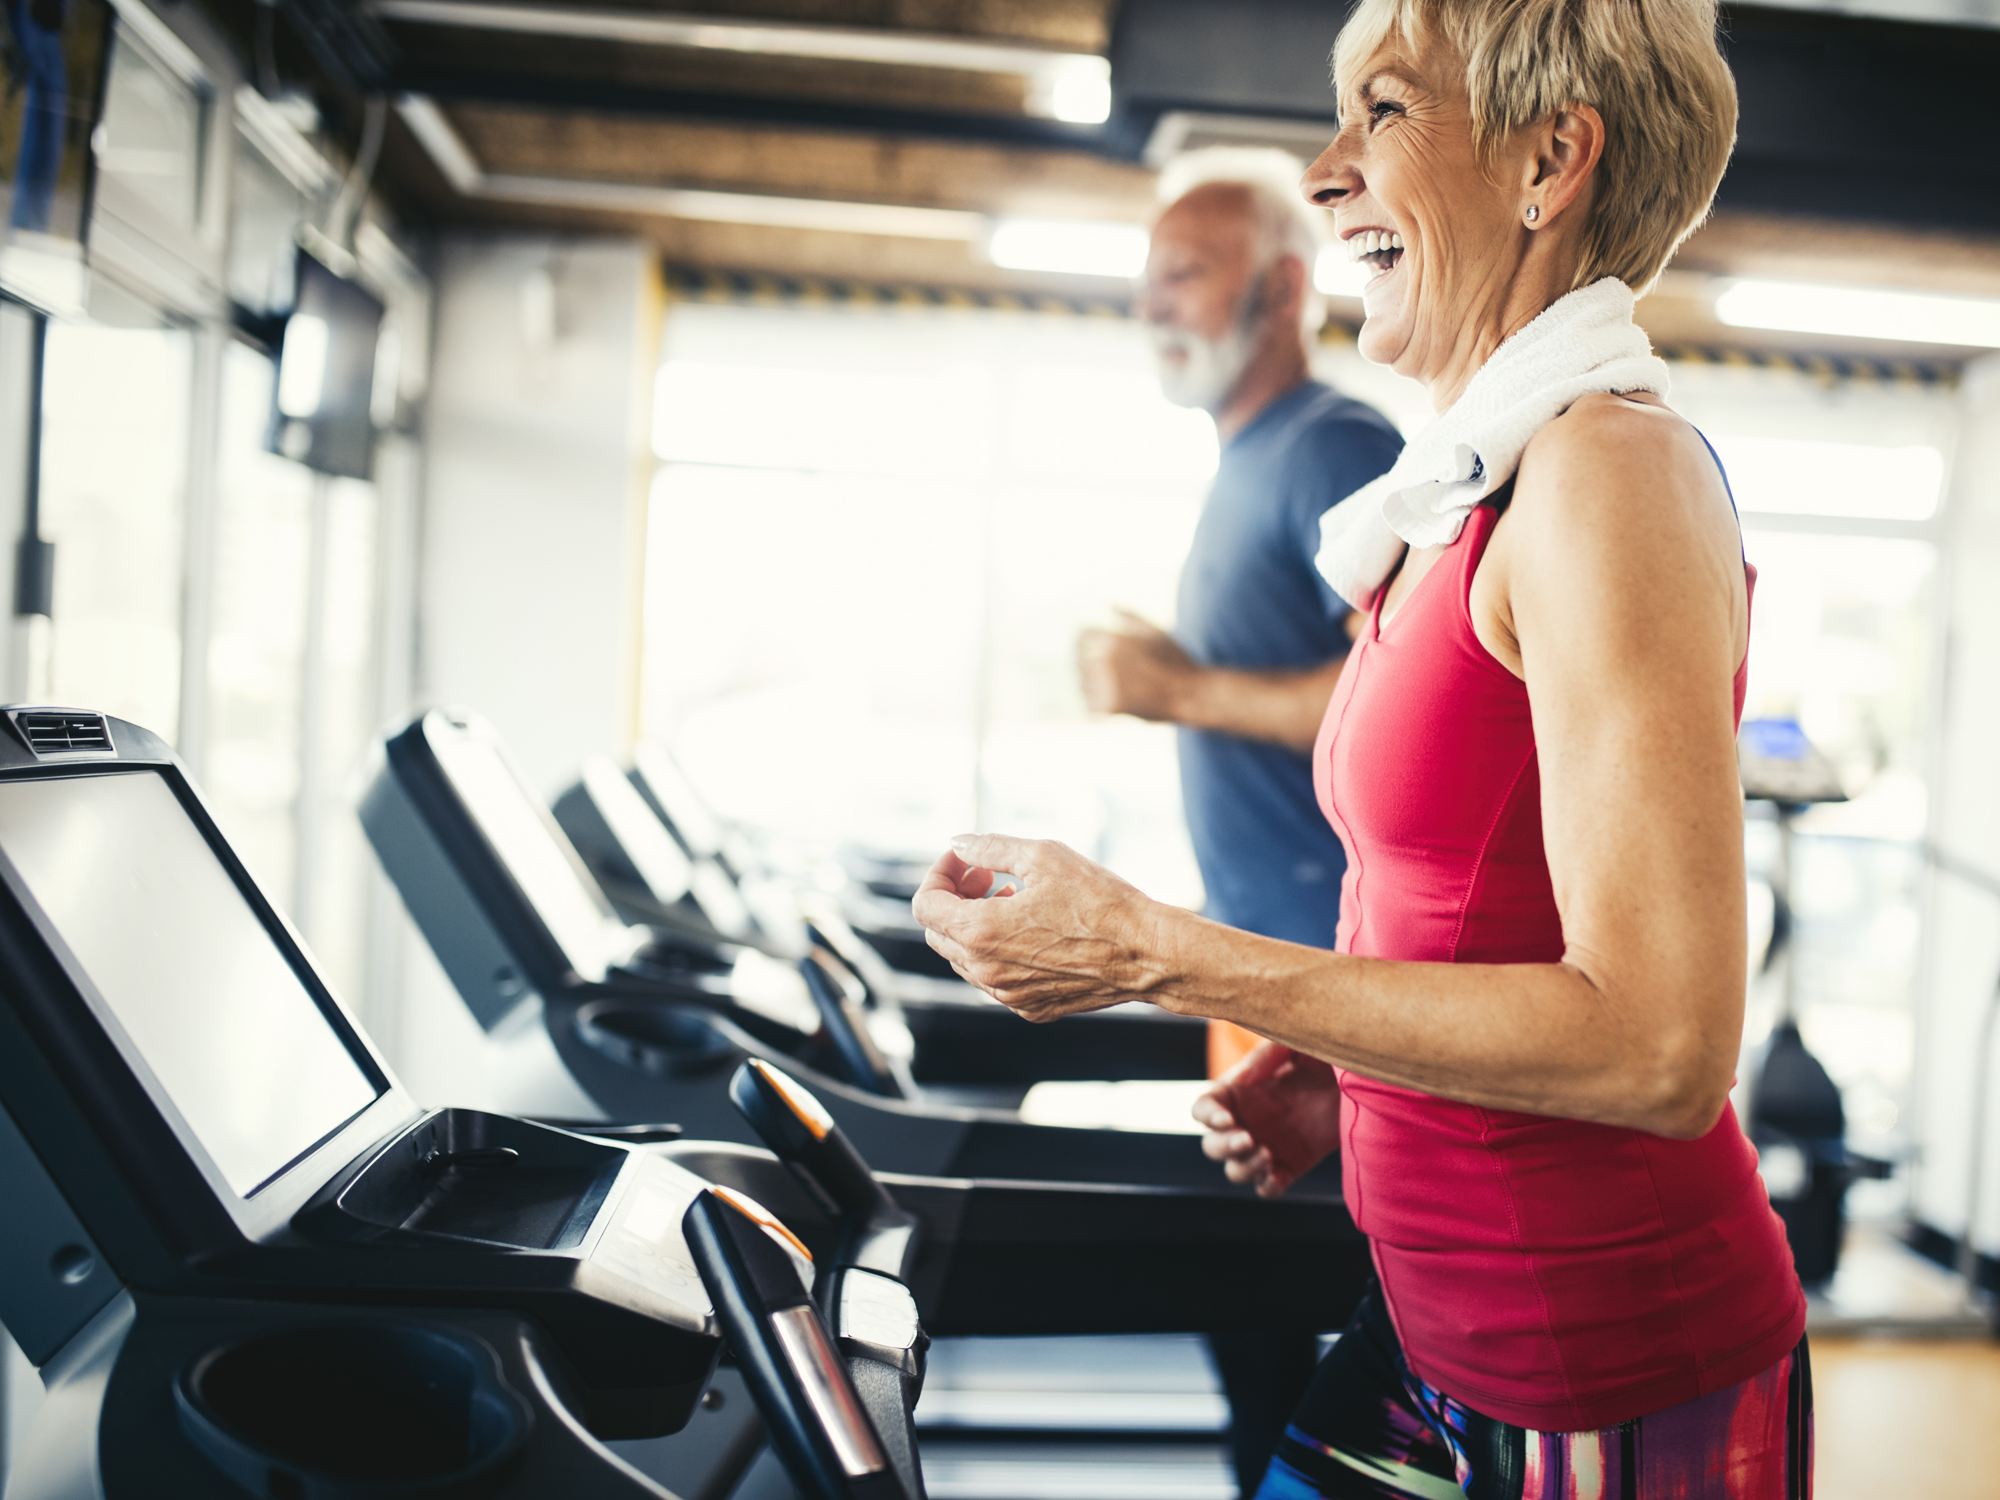 Waiting till middle age to get fit can still get you the benefits of a 20-something